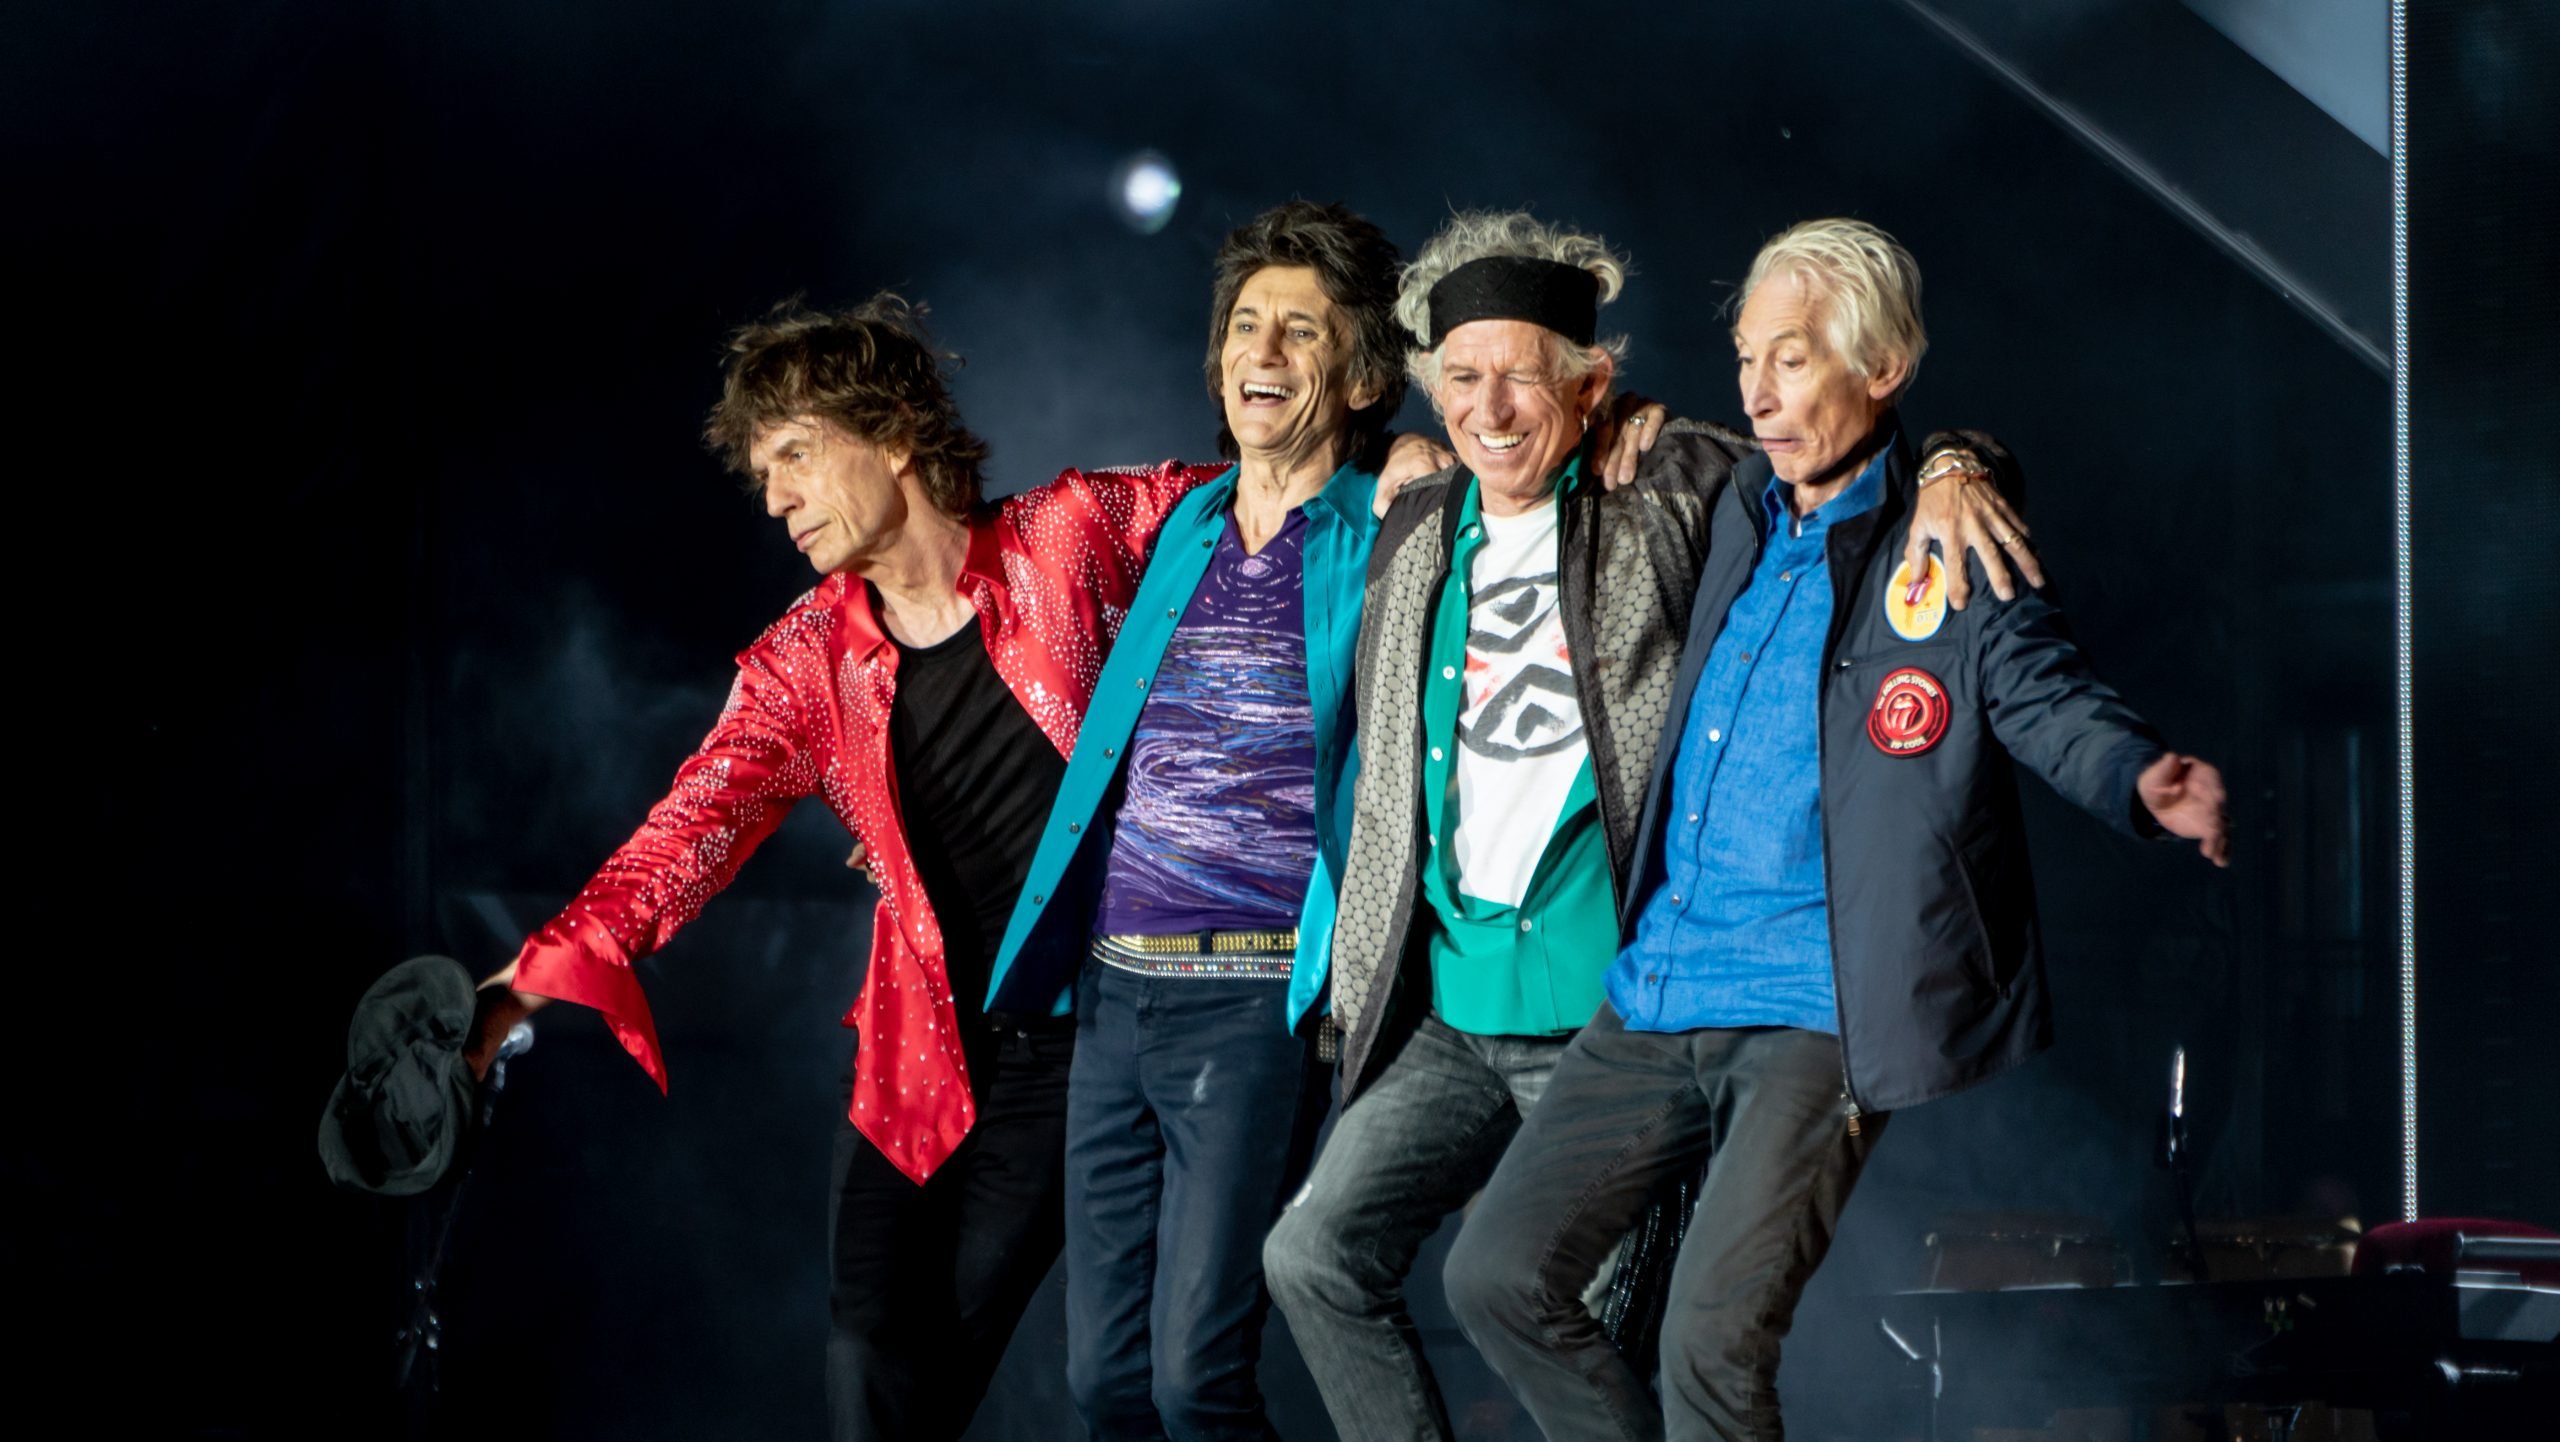 Despite being a founding member, Jones' time with the Stones was brief